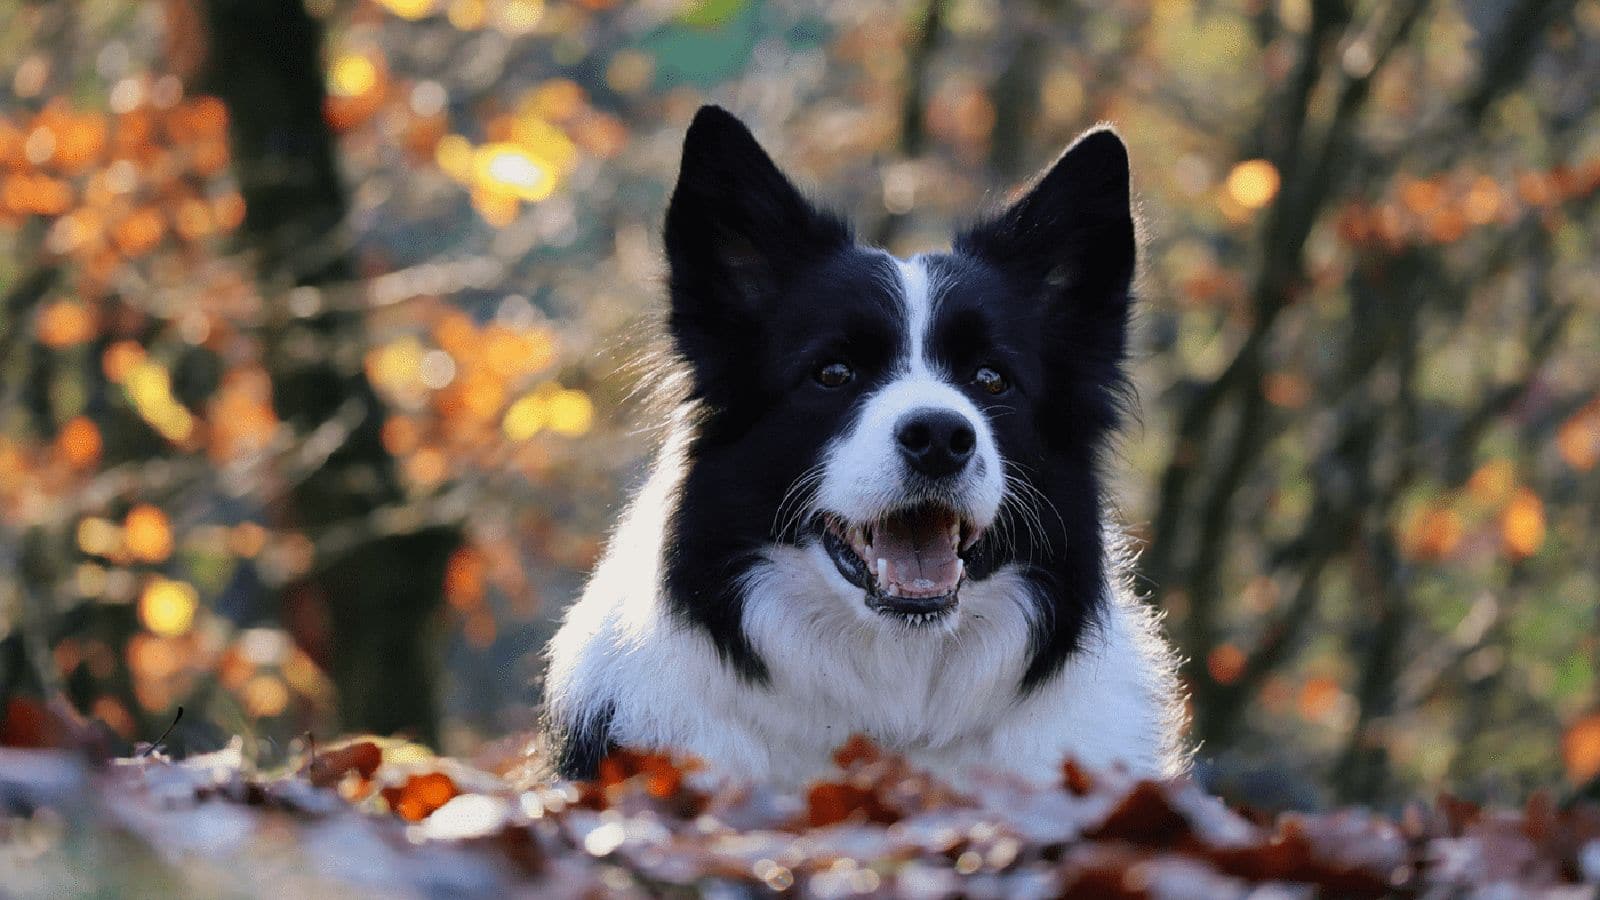 Optimize your Border Collie's exercise routine with these tips